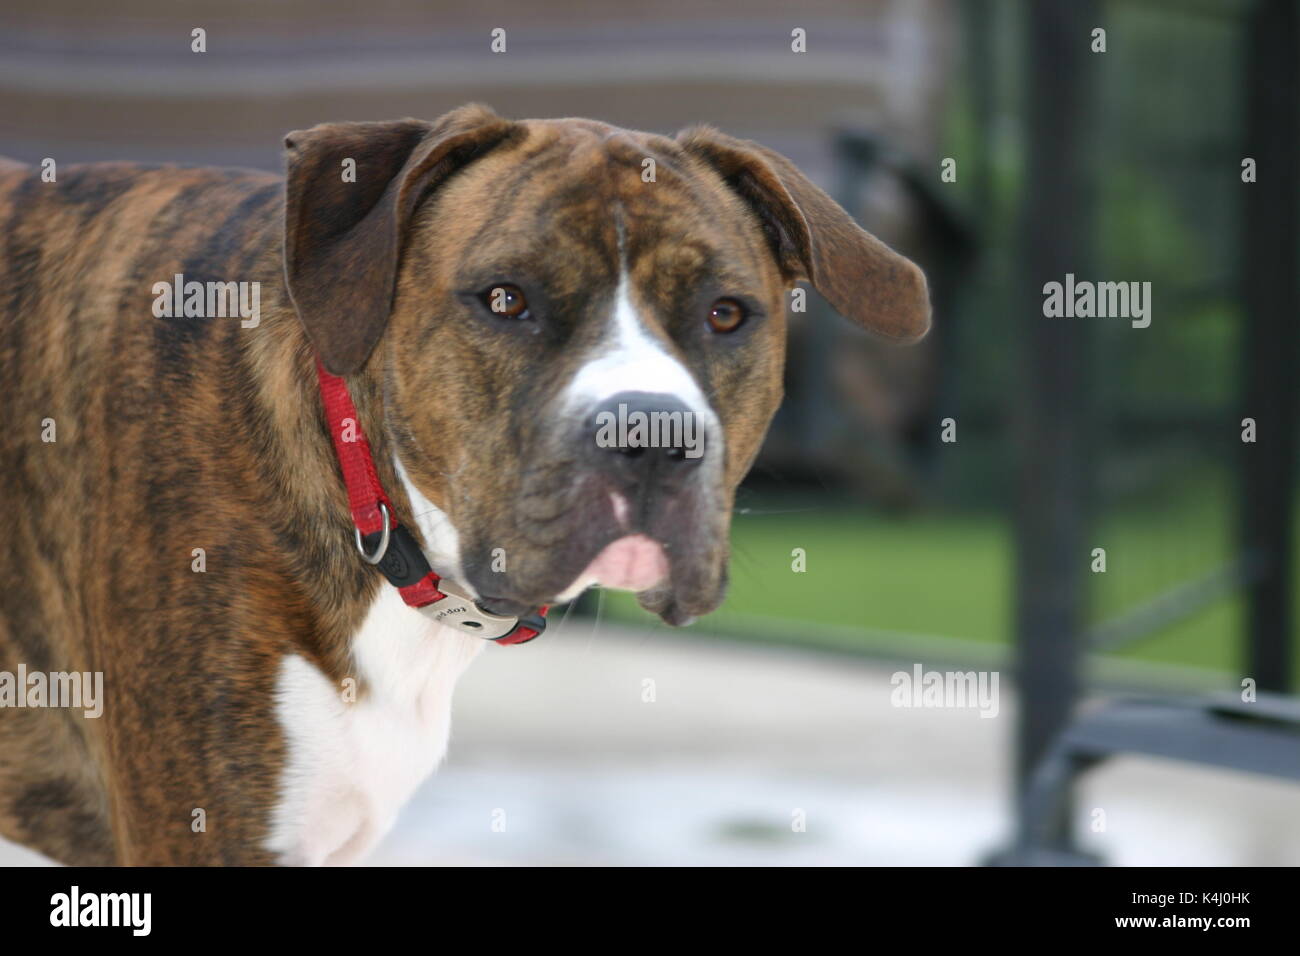 Brindle Bulldog High Resolution Stock Photography and Images - Alamy